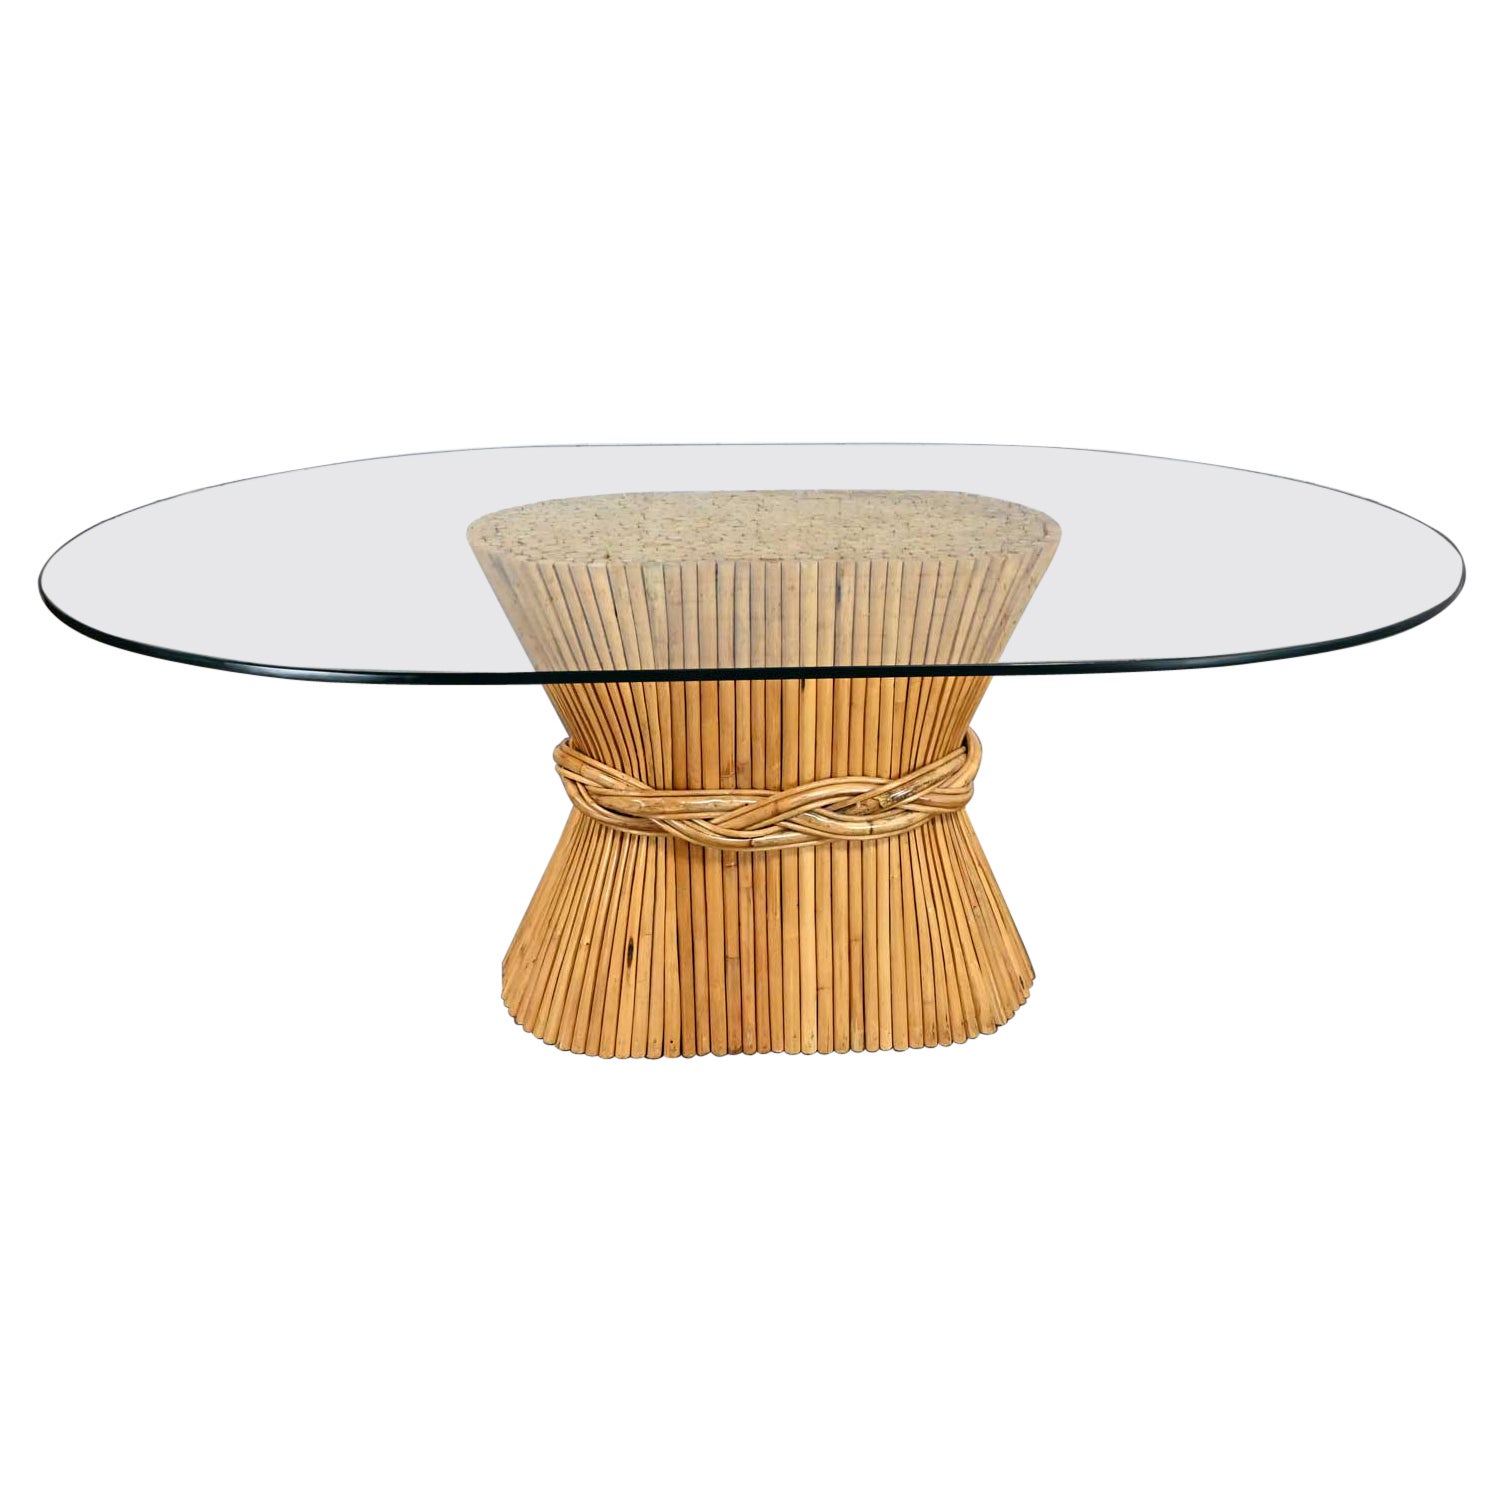 McGuire Style Racetrack Oval Rattan Sheaf of Wheat Glass Top Dining Table